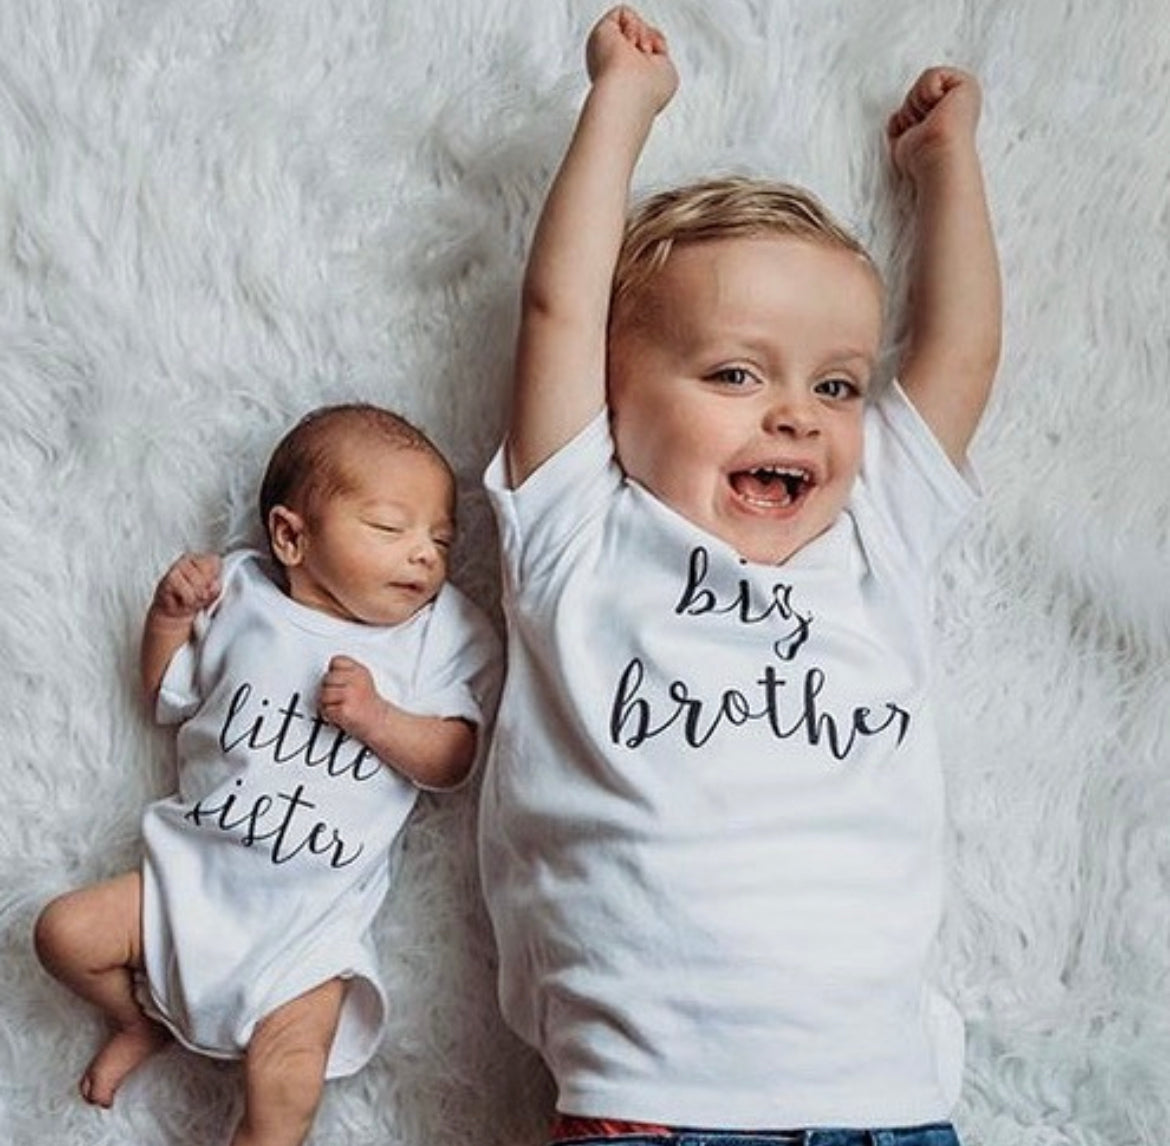 Little sister, big brother, big sister, little brother, gender reveal clothing, new baby clothing, new baby announcement, new baby clothing, rose and guy sibling clothing, sibling tees, rose and guy, new baby arrival, new baby clothing, unique baby gifts 